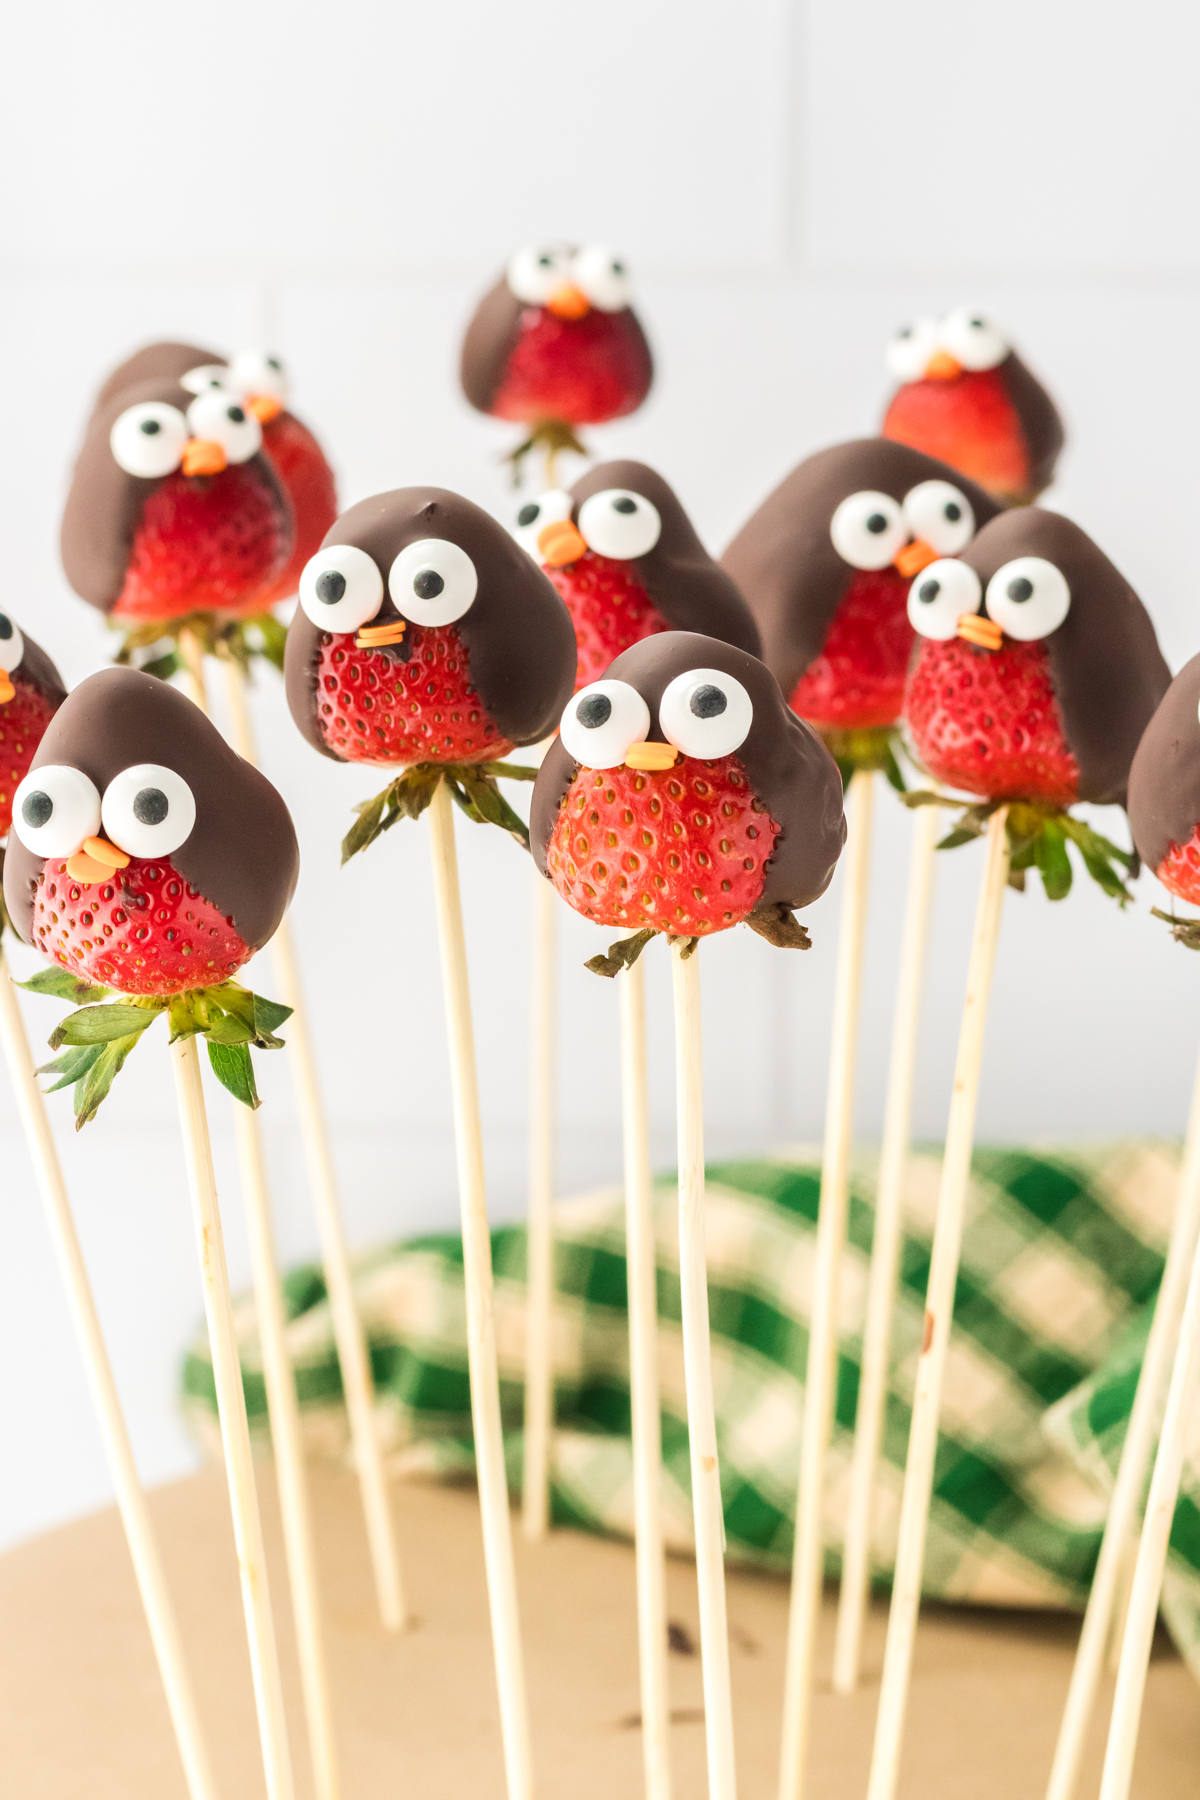 chocolate covered strawberry penguins on sticks